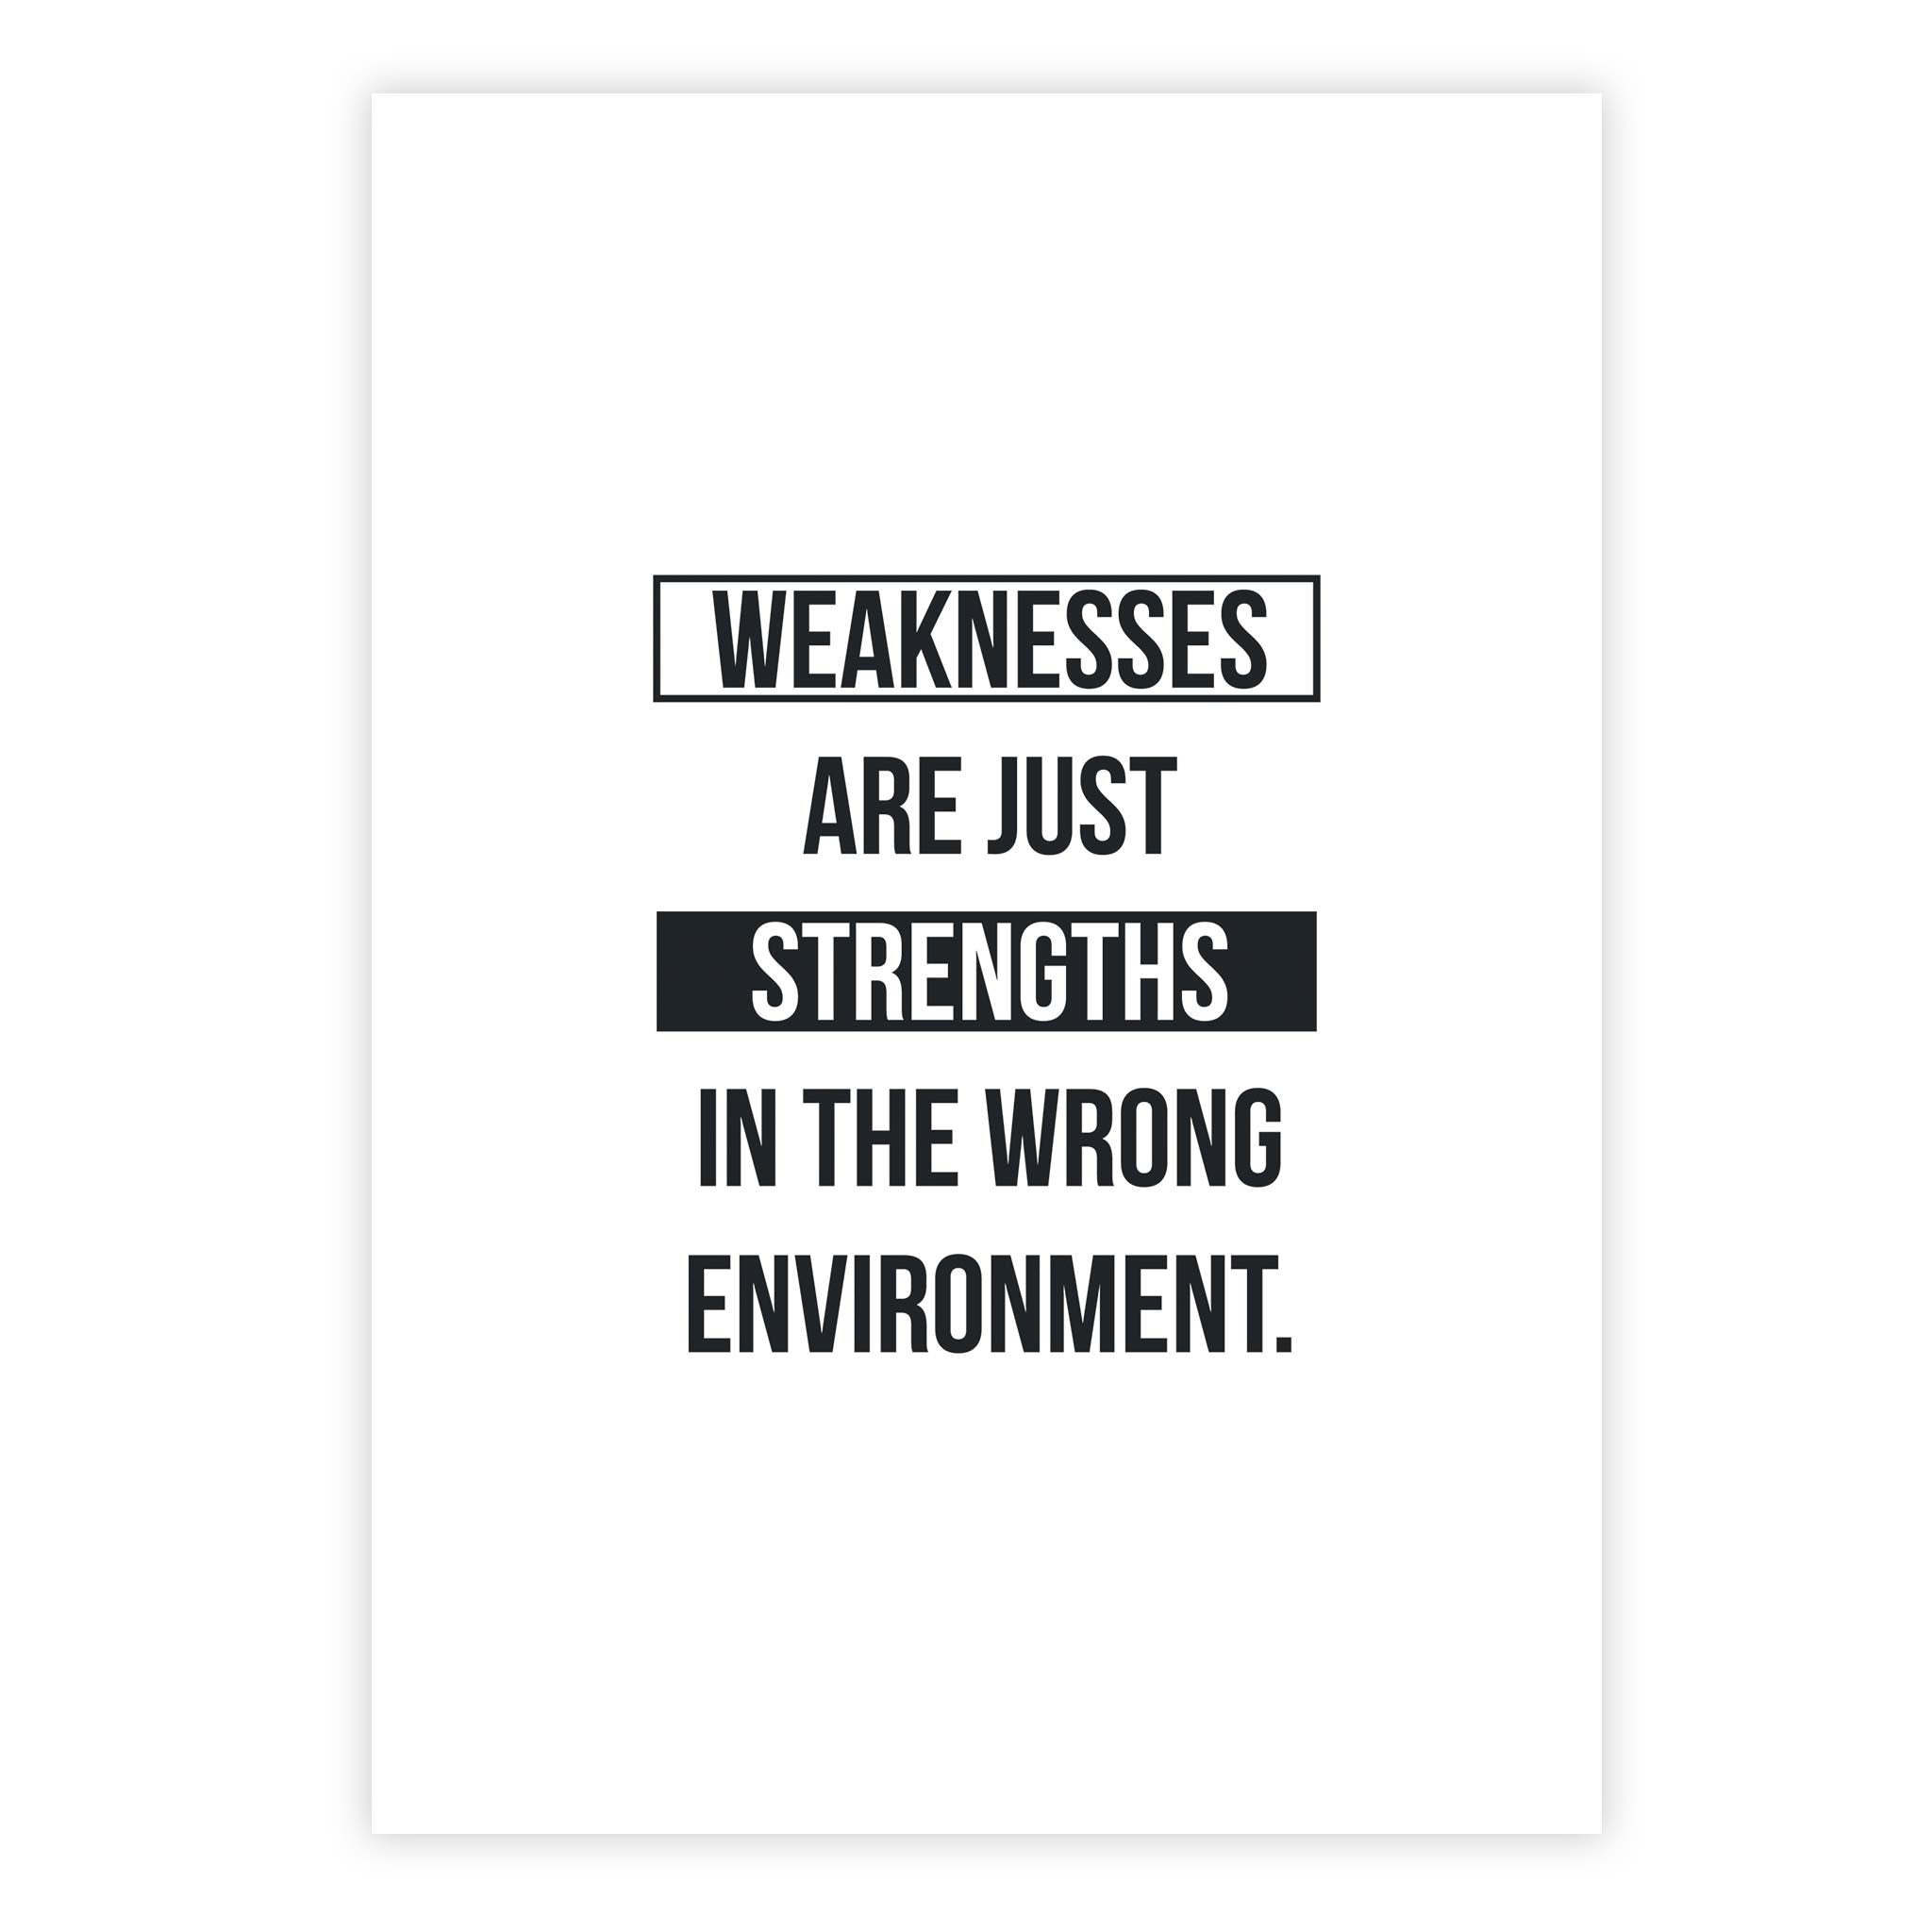 Weaknesses are just strengths in the wrong environment